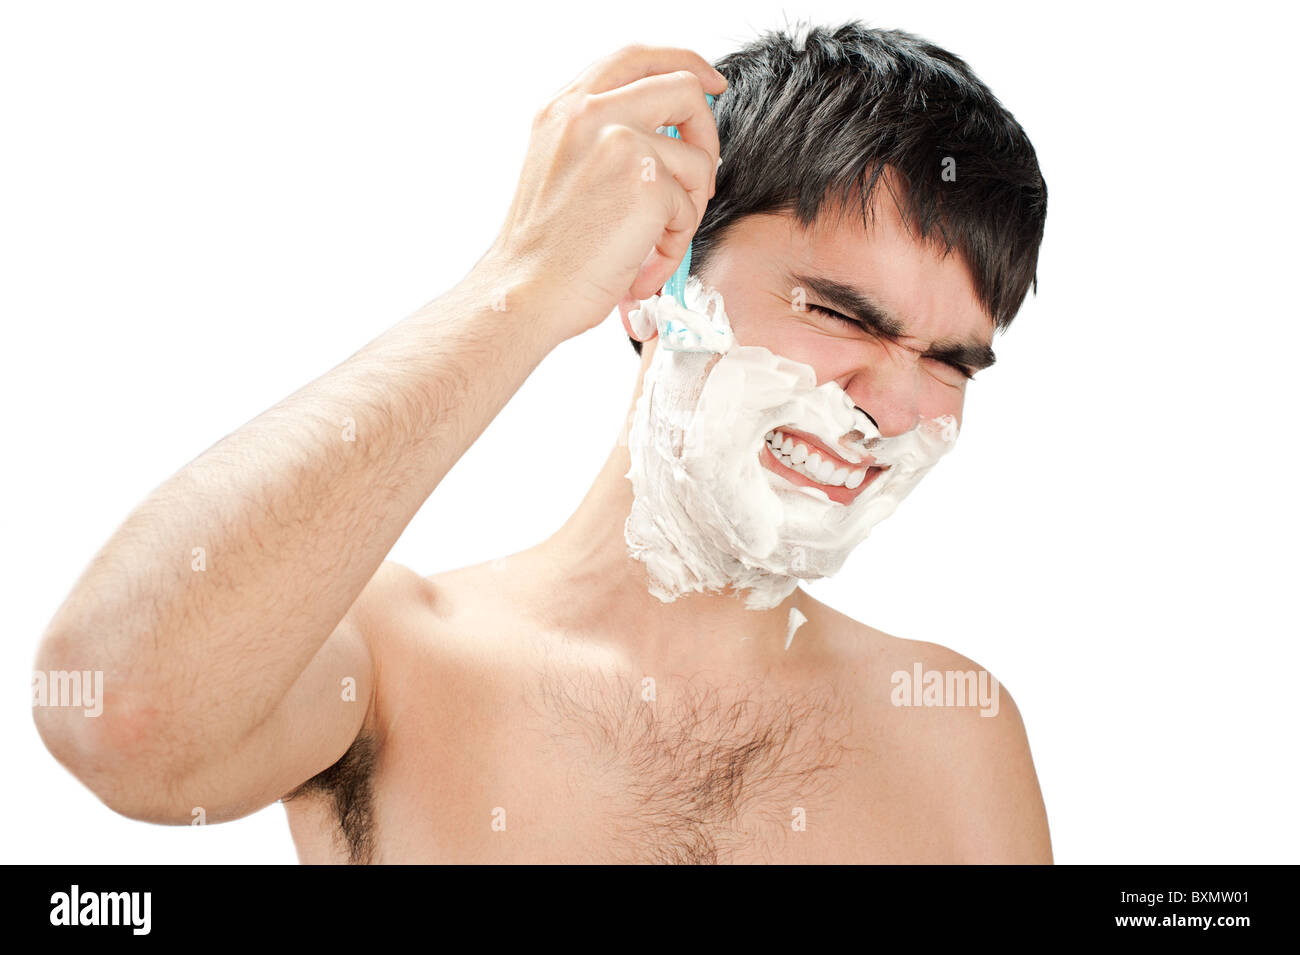 Hate to shave. Young boy shaving with hate and aggression Stock Photo -  Alamy